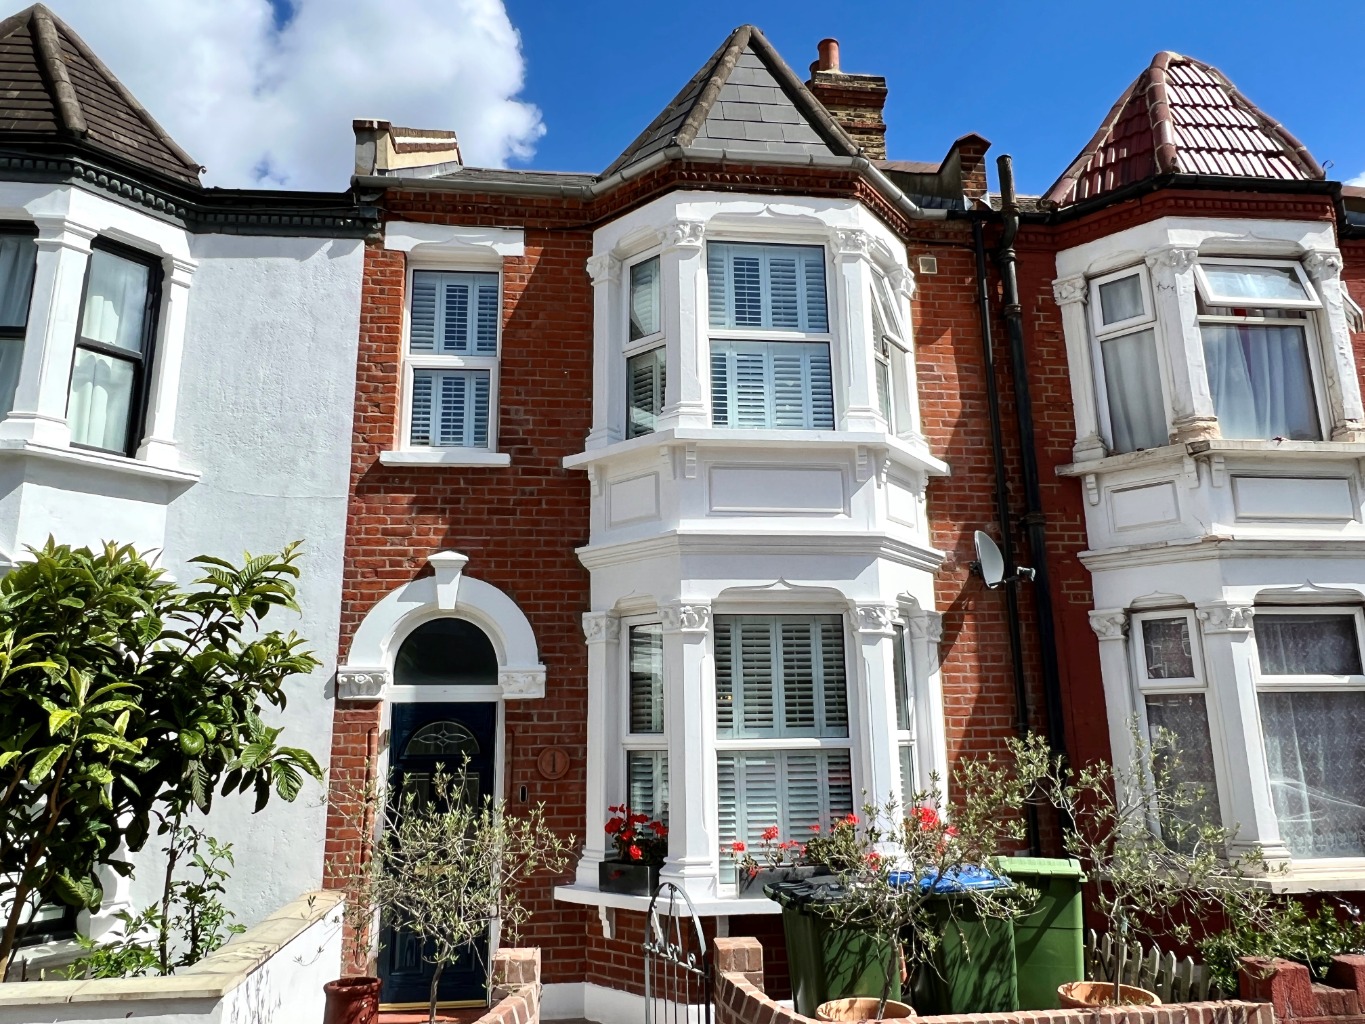 Beaumont Gibbs are offering for rent this simply stunning three double bedroomed house for rent. Situated in one of the most desirable roads in the  Plumstead Common area, this is a must see house.